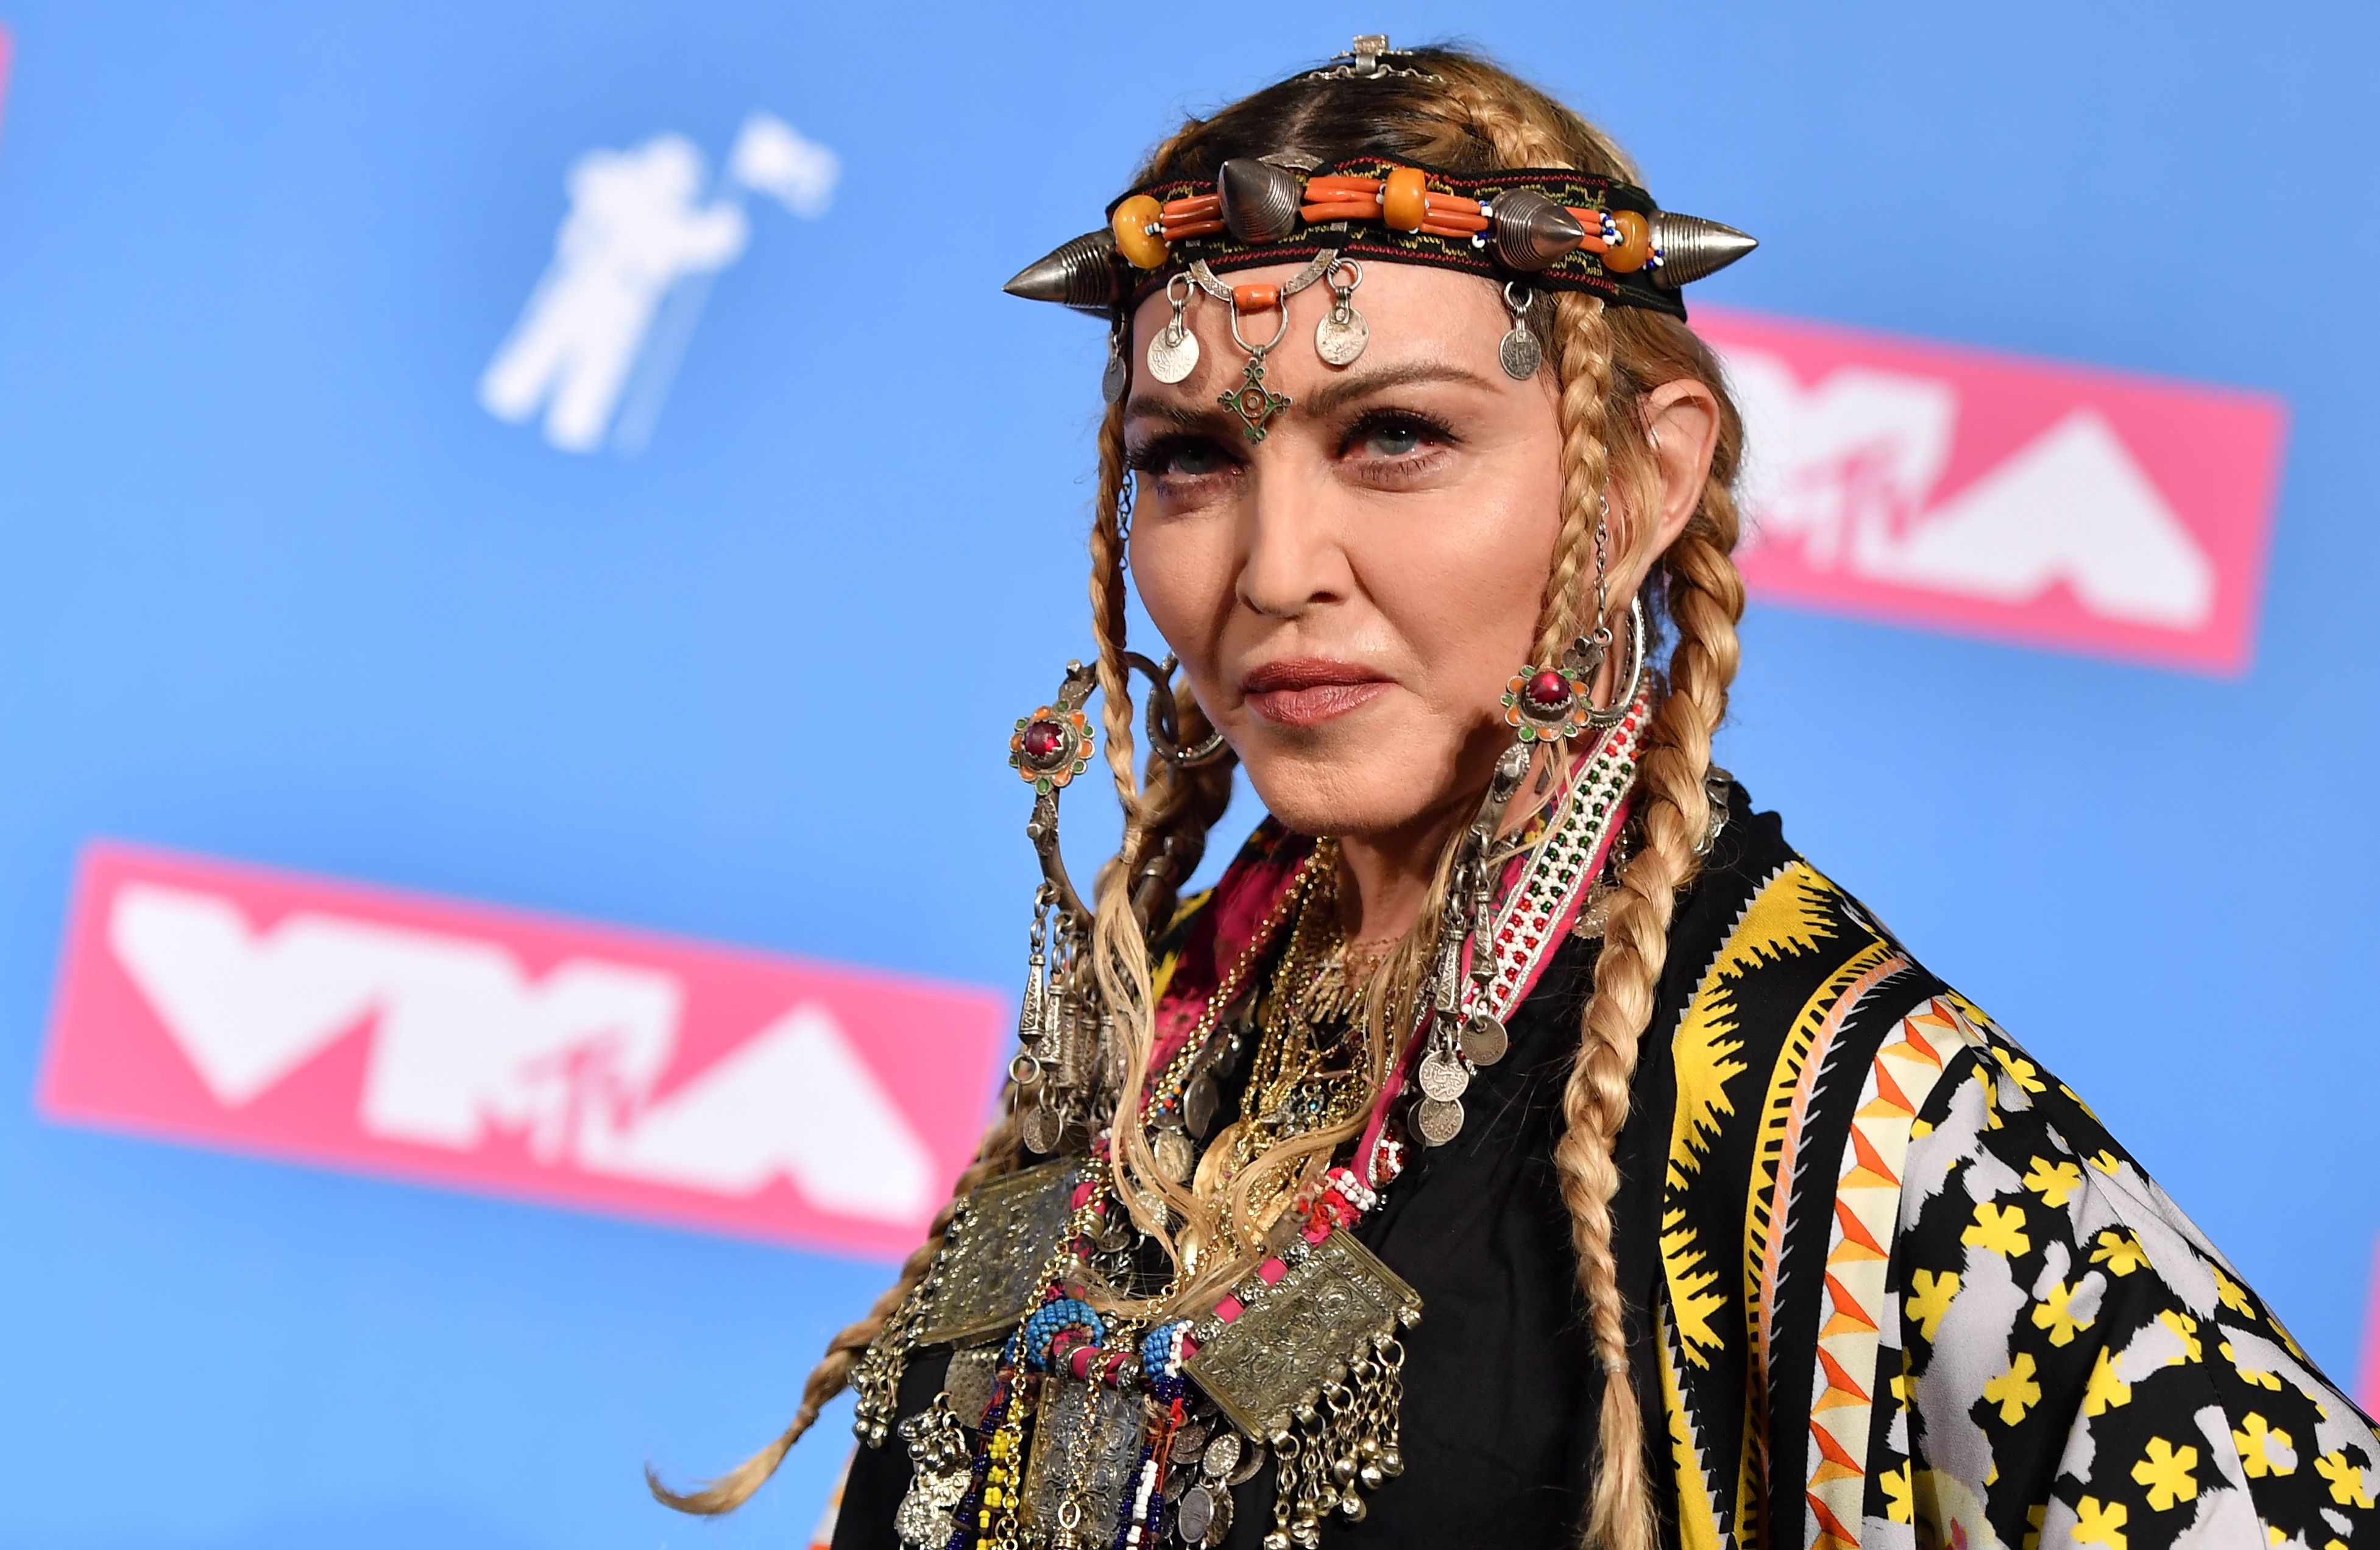 The Pop star Madonna, at the MTV VMAs at Radio City Music Hall in New York City, New York, August 20, 2018. | Source: Getty Images